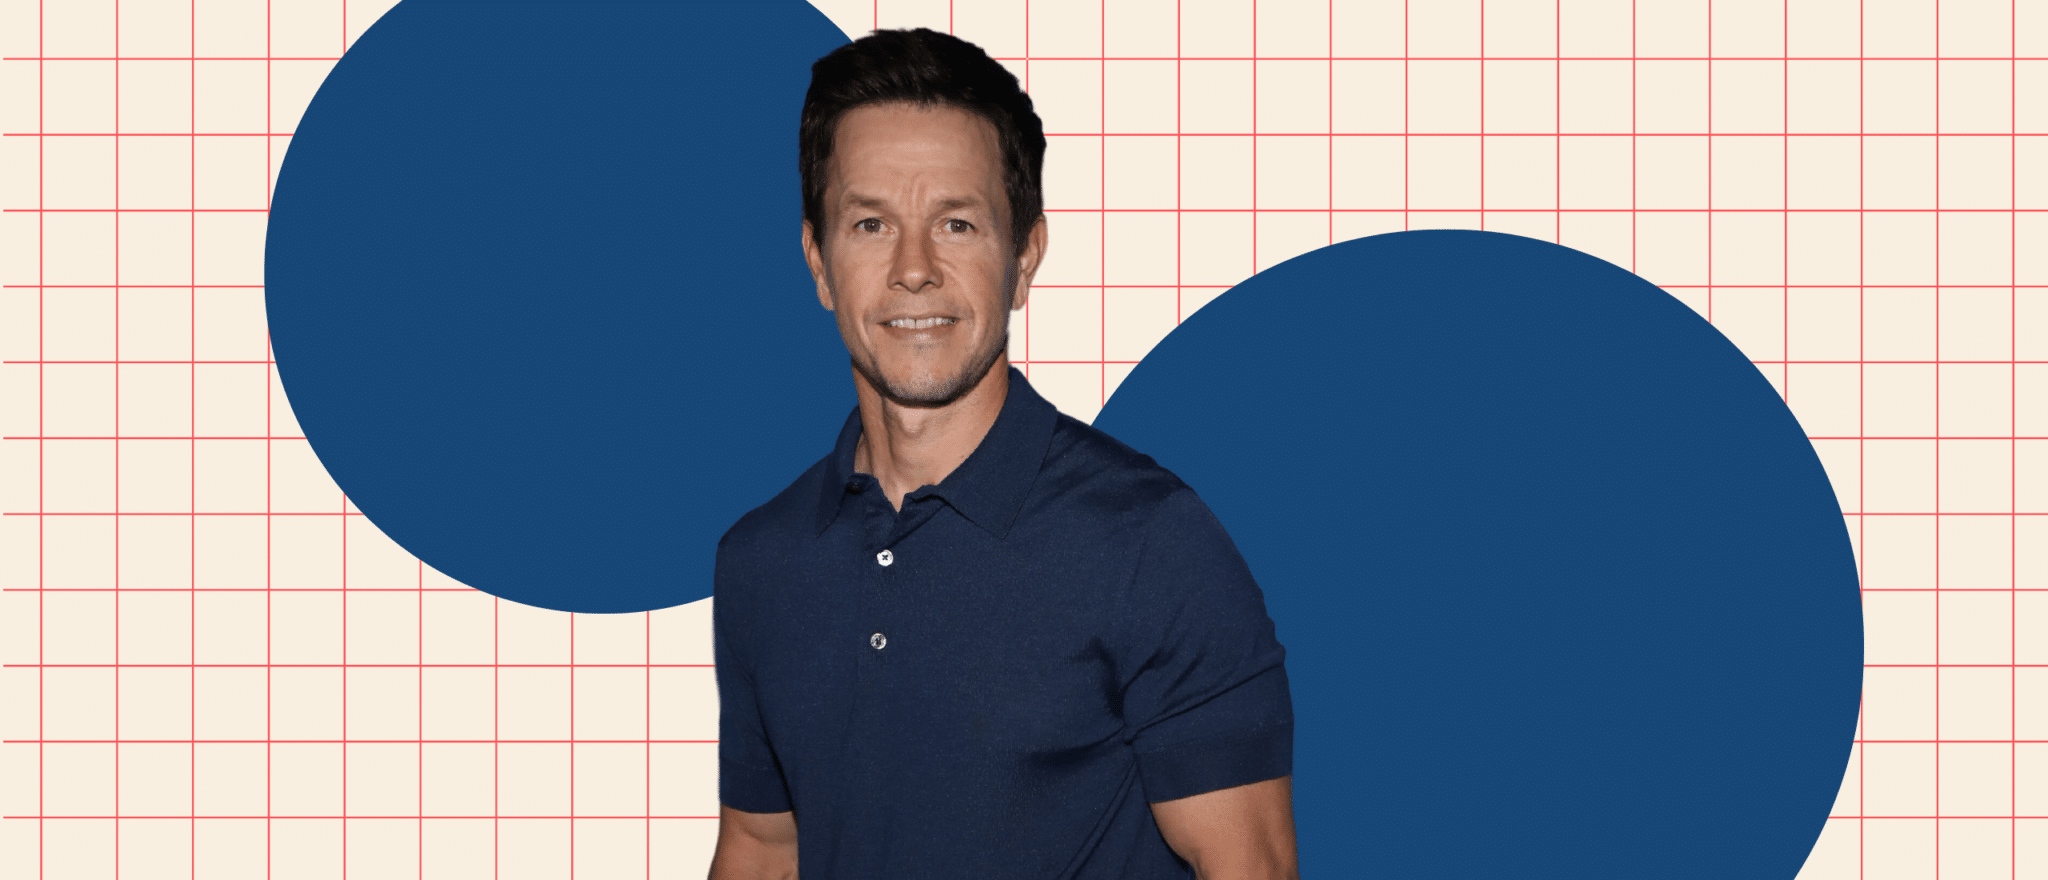 Fitness Advice Mark Wahlberg Wishes He Would’ve Listened to 20 Years Ago